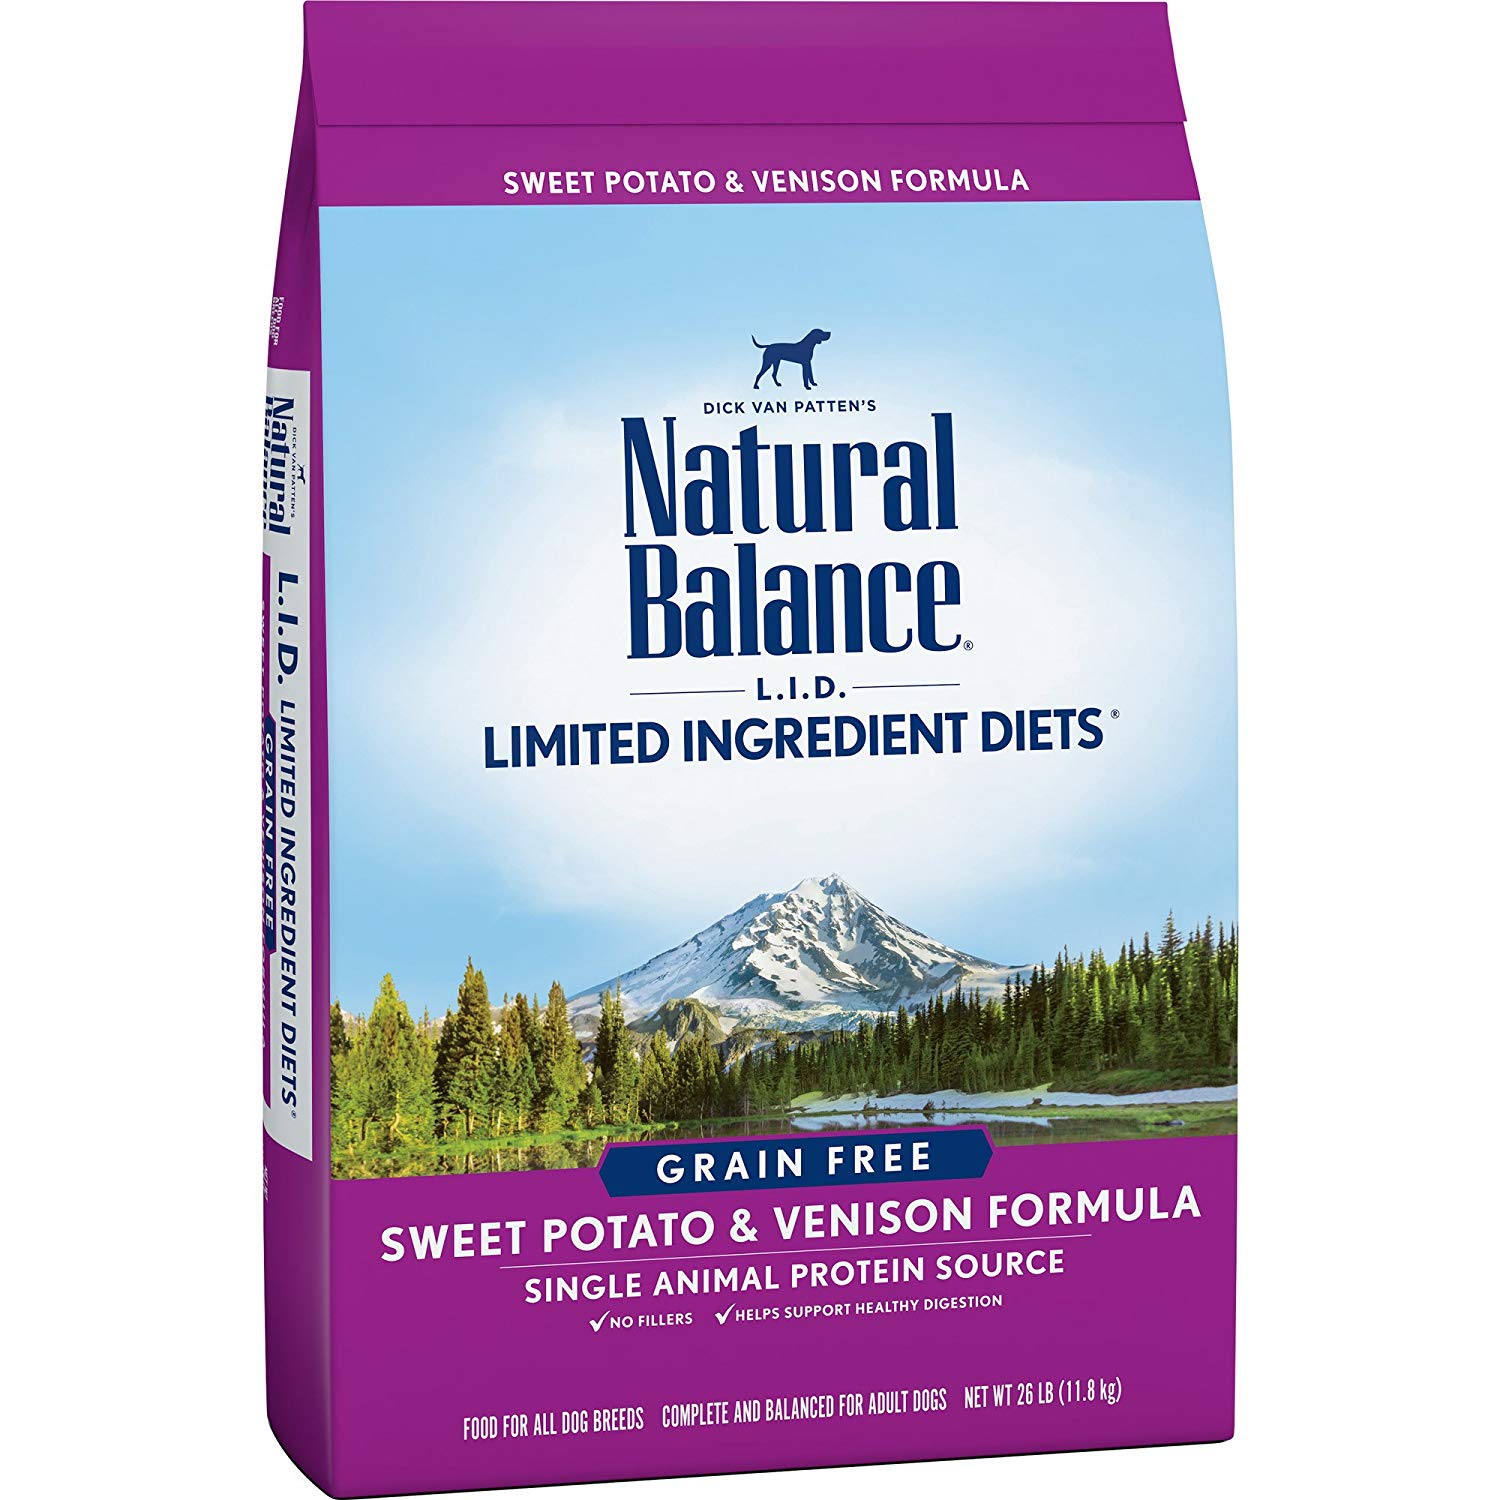 Natural Balance Limited Ingredient Diets grain-free dry dog food best for weight management